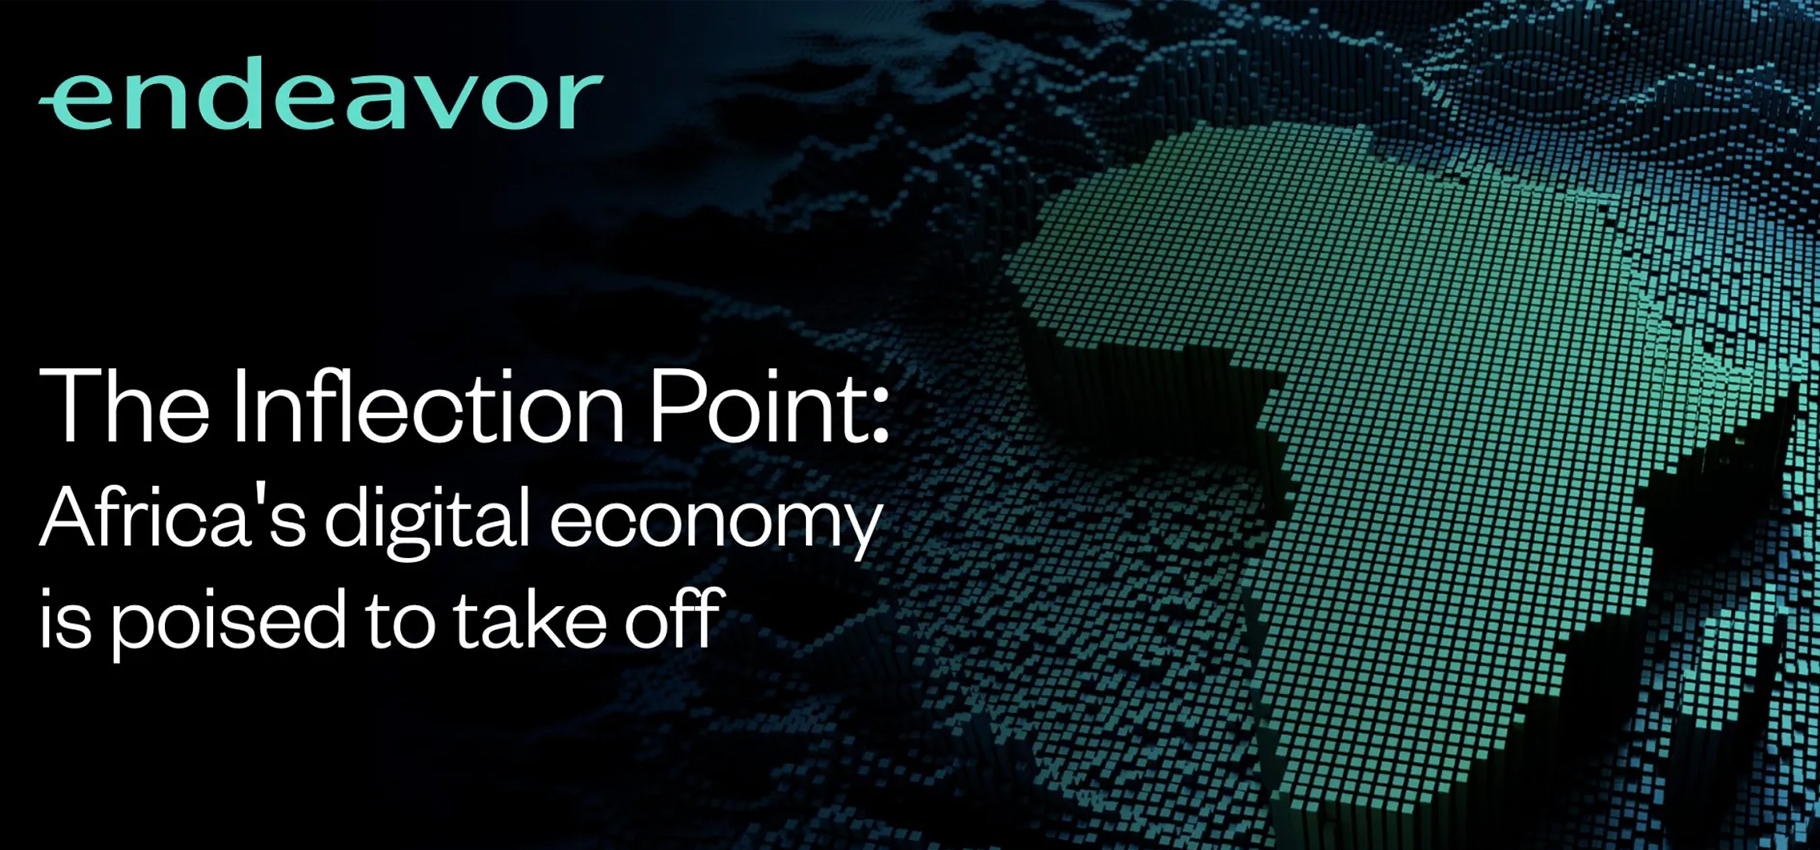 Africa’s Technology Ecosystem is Poised For Exponential Growth According To Report From Endeavor Nigeria